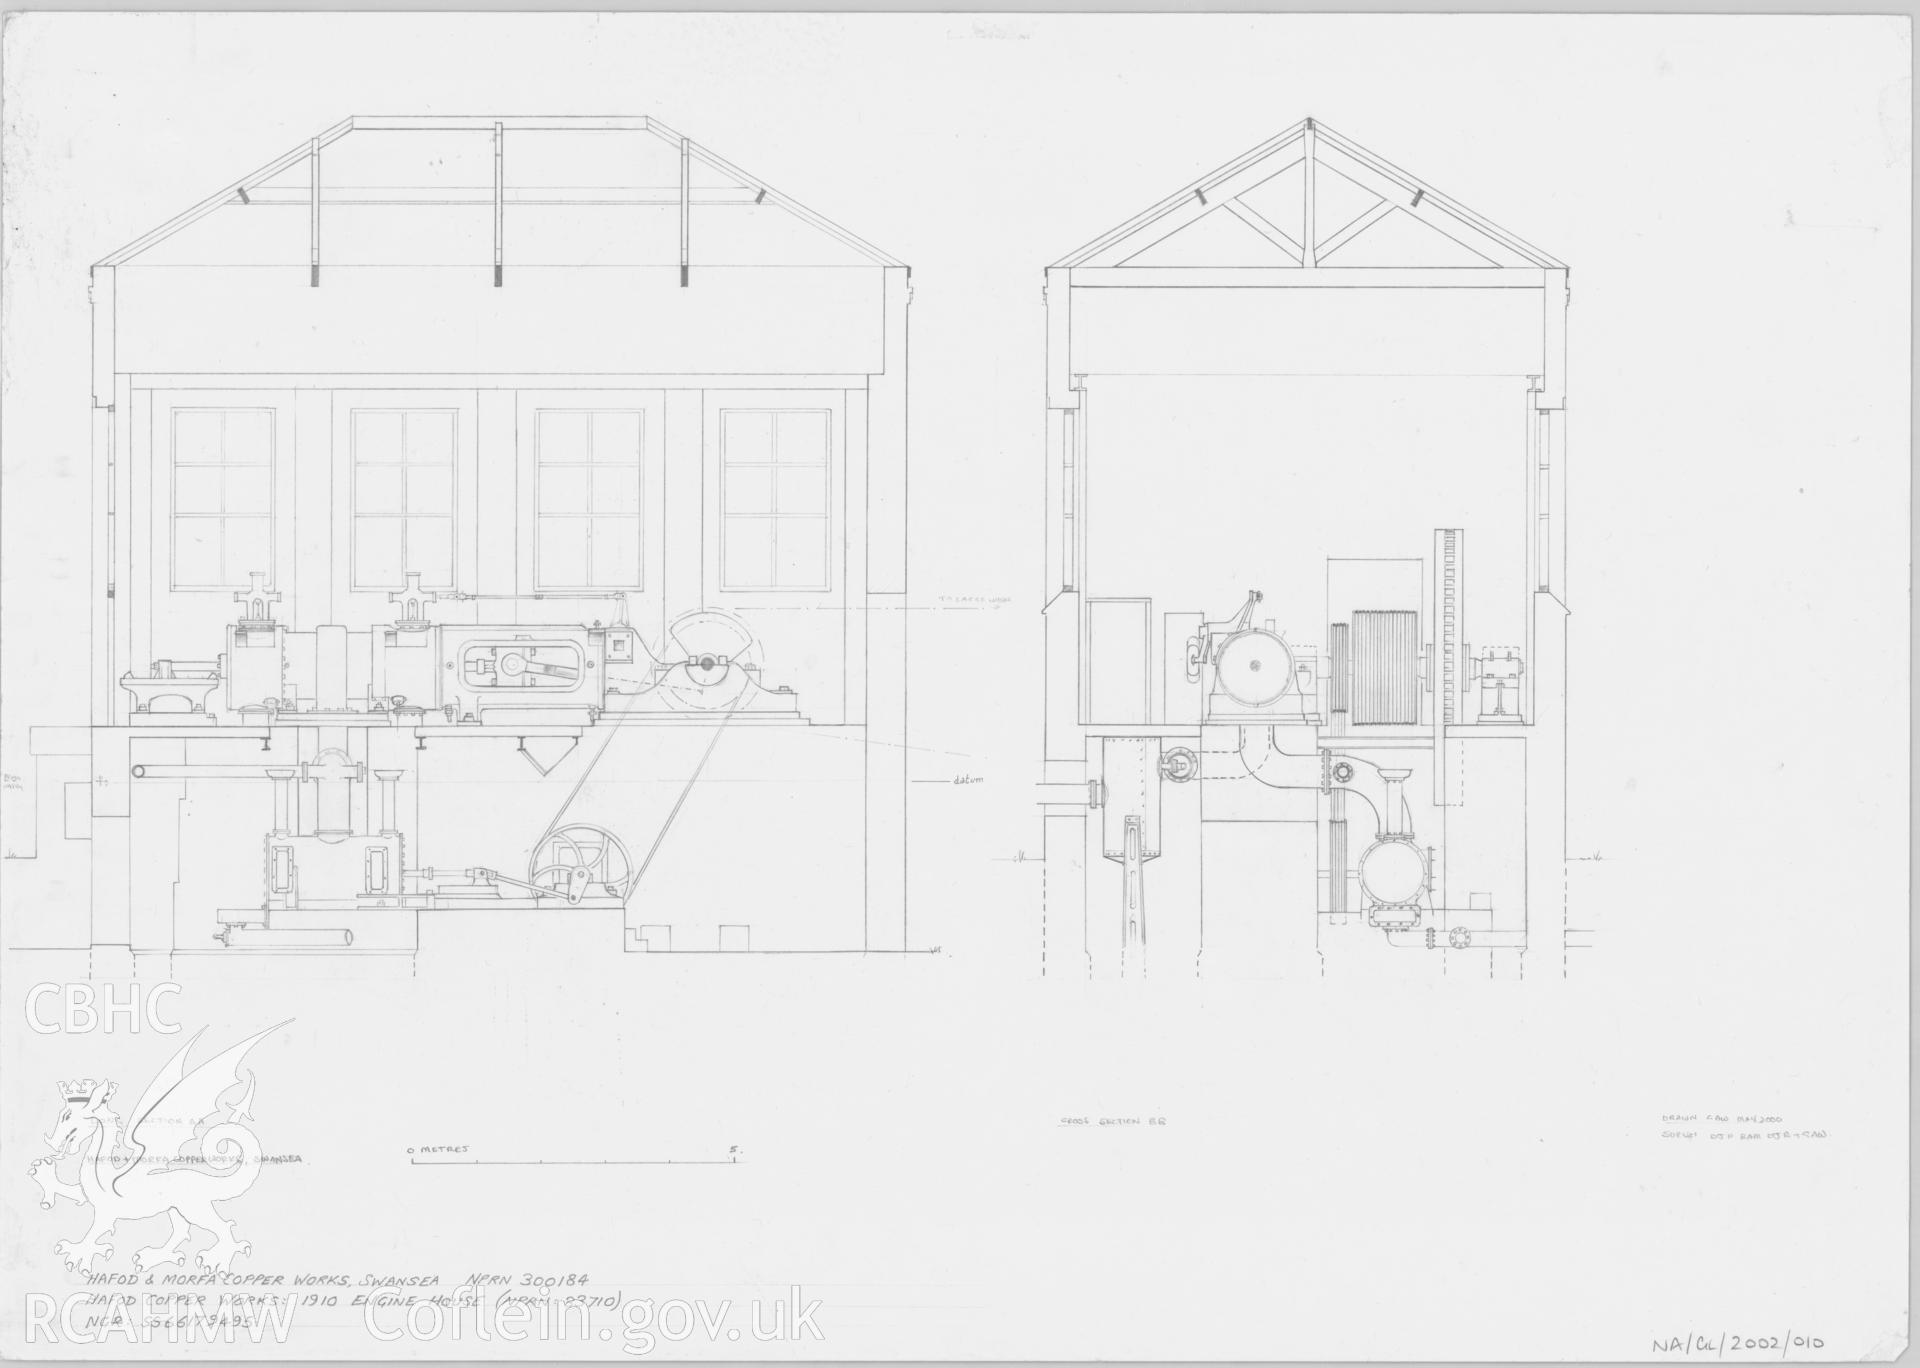 Measured survey comprising long section and cross section views of the Engine House at Hafod and Morfa Copperworks, drawn by Geoff Ward following survey by Dylan Roberts, Brian Malaws, David Percival and Geoff Ward, 2000.